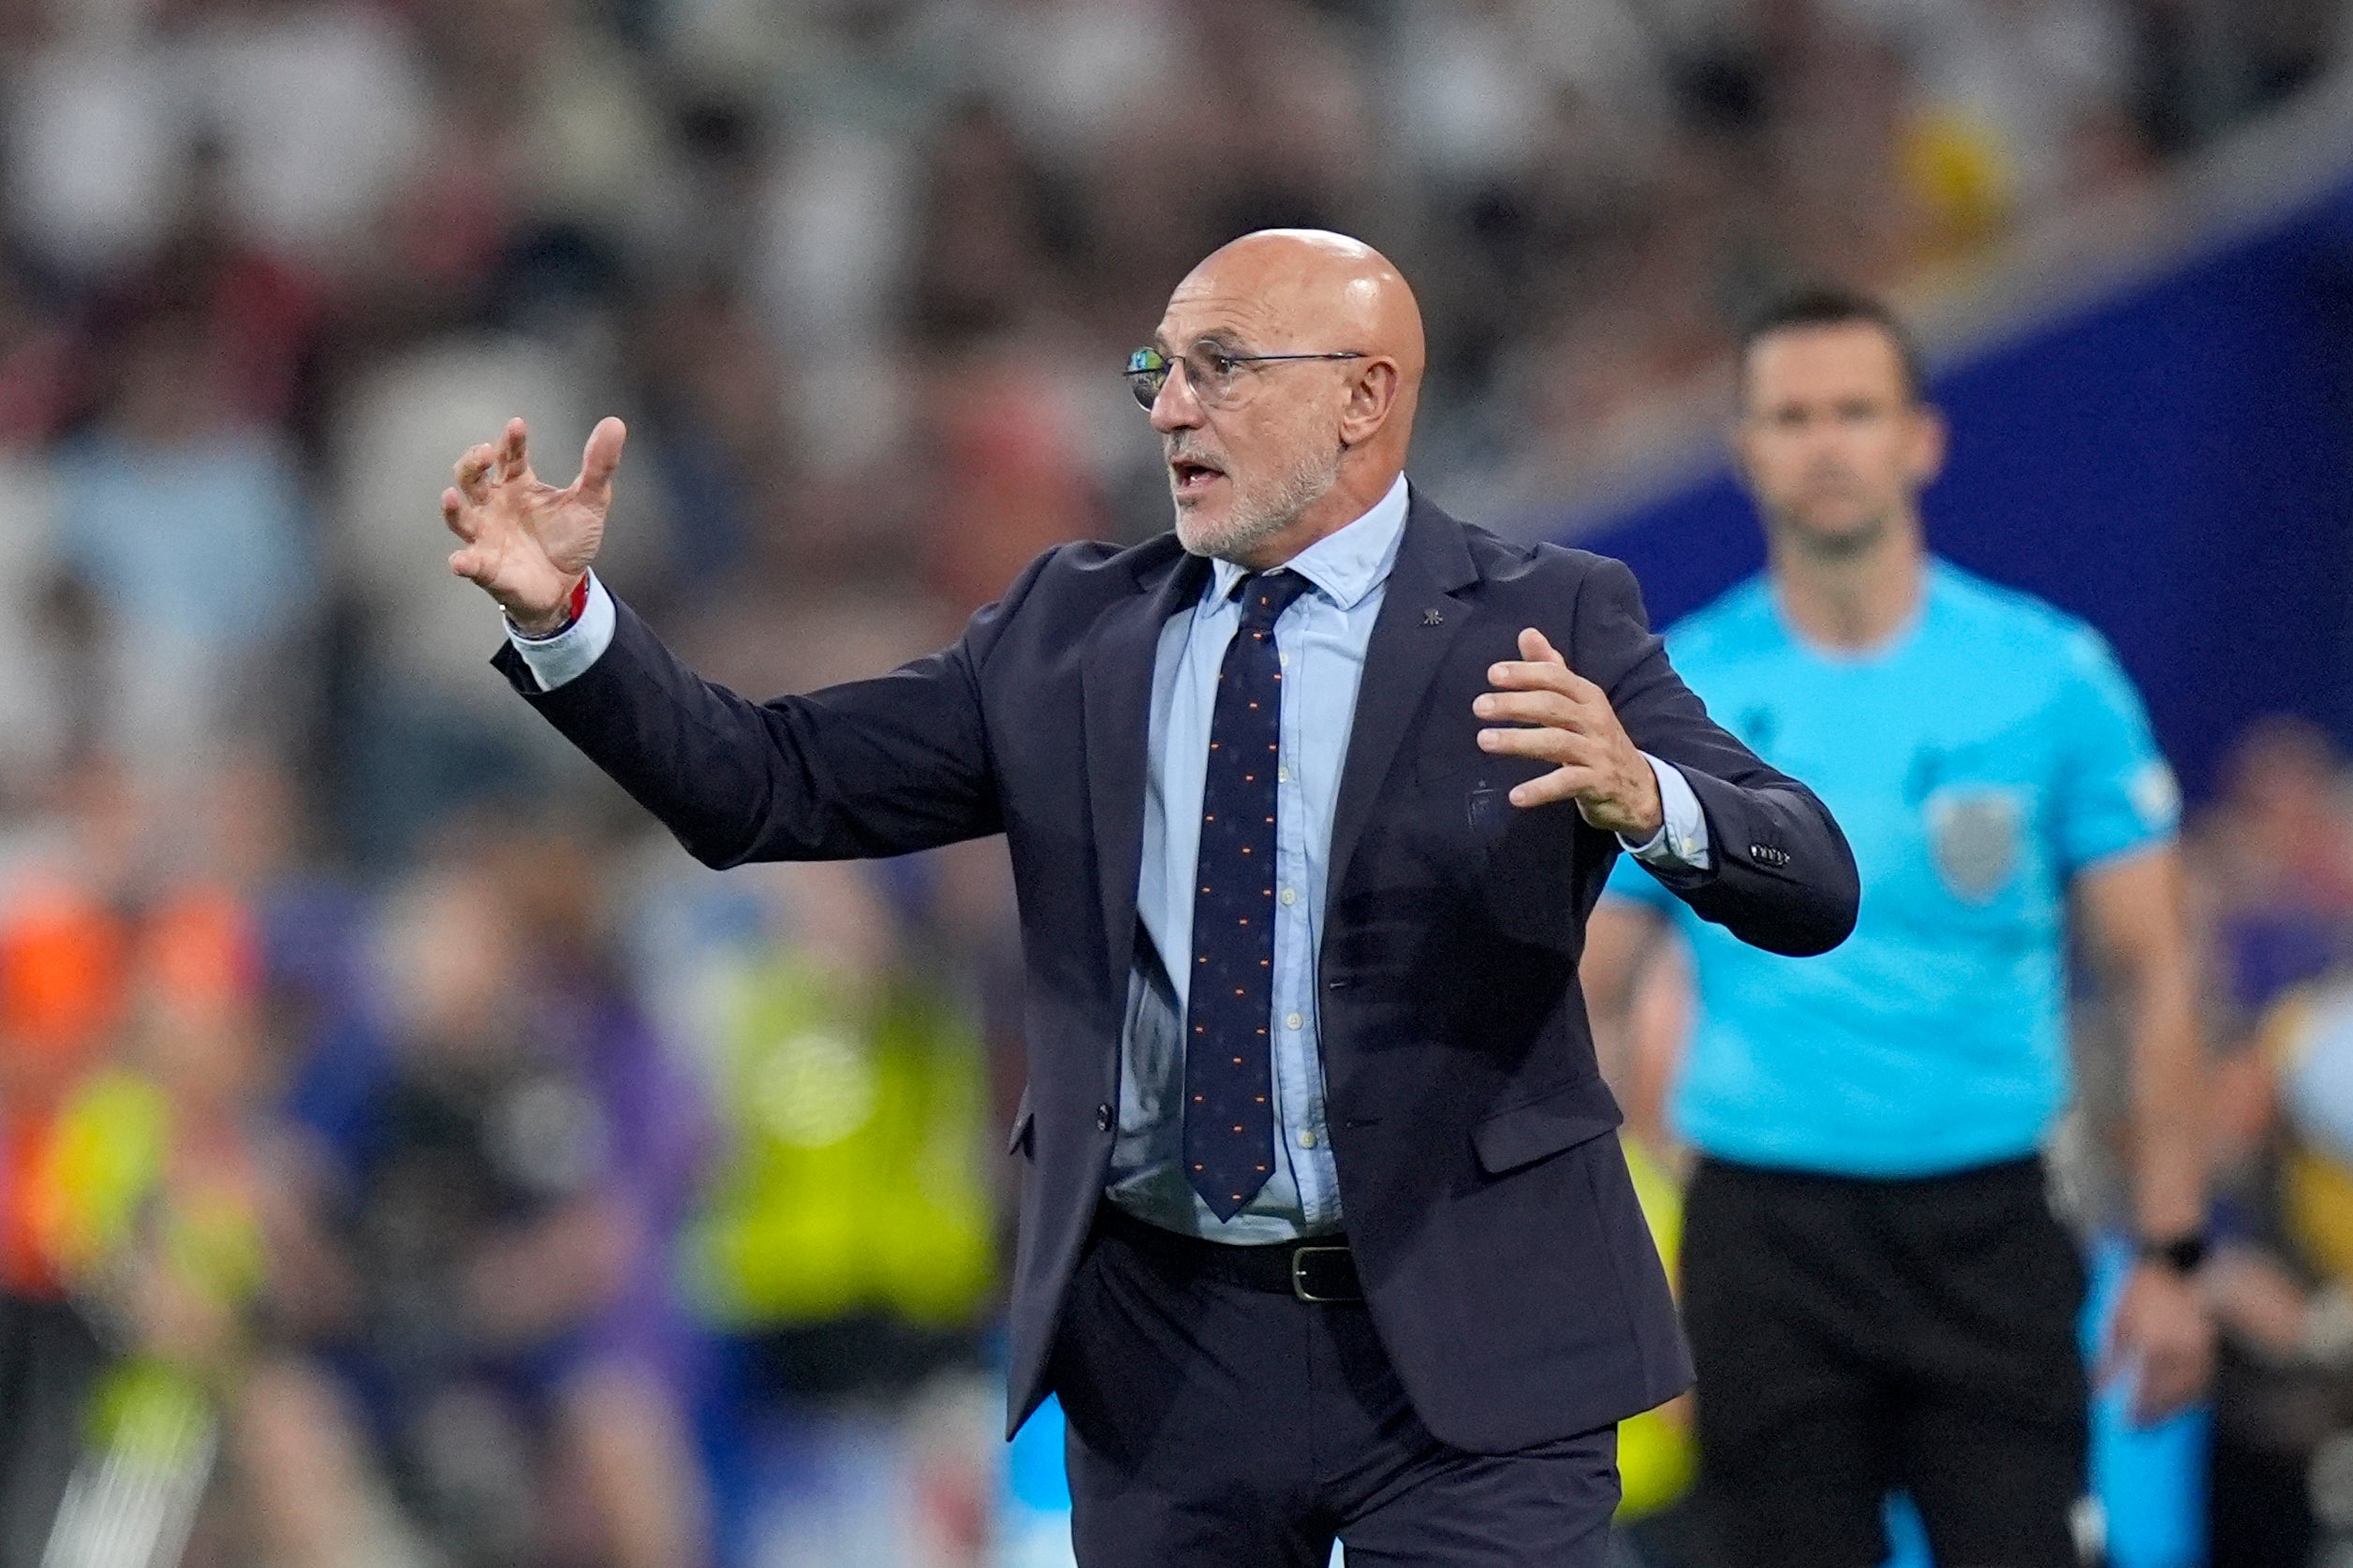 Spain coach Luis de la Fuente apologised for applauding Luis Rubiales at the latter’s defiant press conference